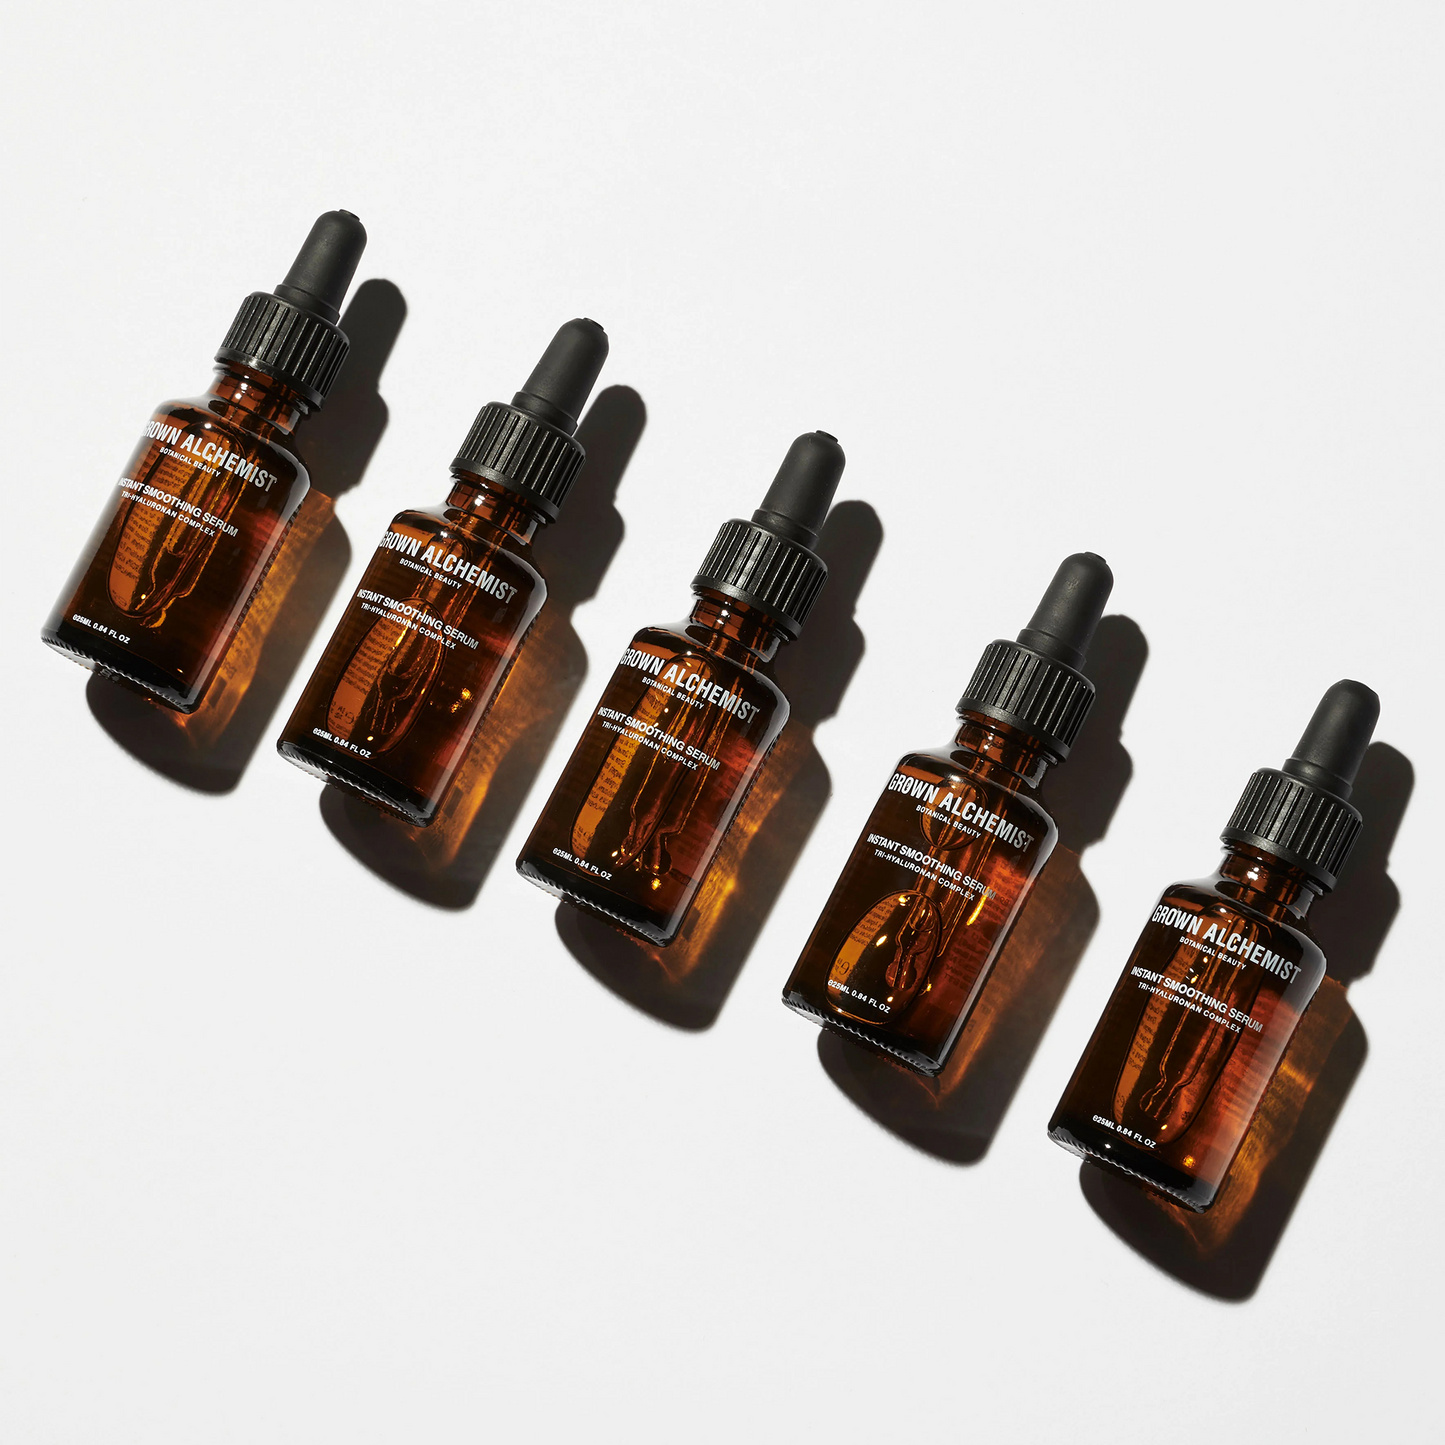 Grown Alchemist Instant Smoothing Serum: Formulated using a complex-combination of plant-derived Hyaluronan molecules, this innovative anti-aging serum delivers an instant lifting effect through intense hydration, rapidly smoothing the skin’s surface. When used regularly this serum acts as a preventative-aging super booster serum, preventing dehydration and noticeably preventing the formation of fine lines and wrinkles. This Instant Smoothing Serum is a powerful daily beauty elixir.